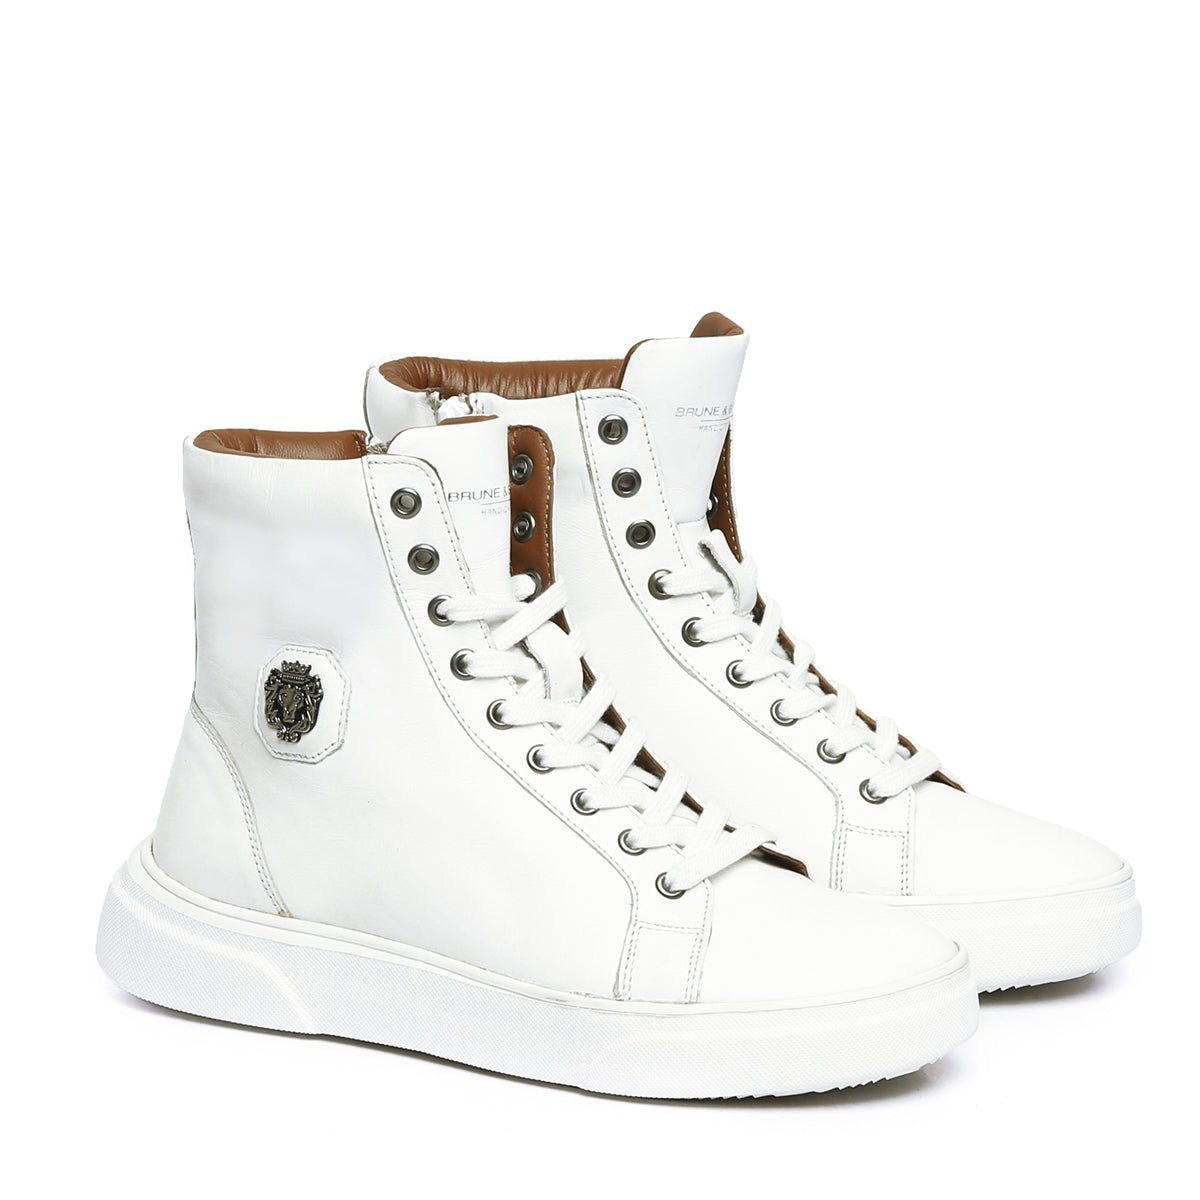 White High Ankle Sneakers With Metal Lion Logo E.V.A Sole by Brune & Bareskin